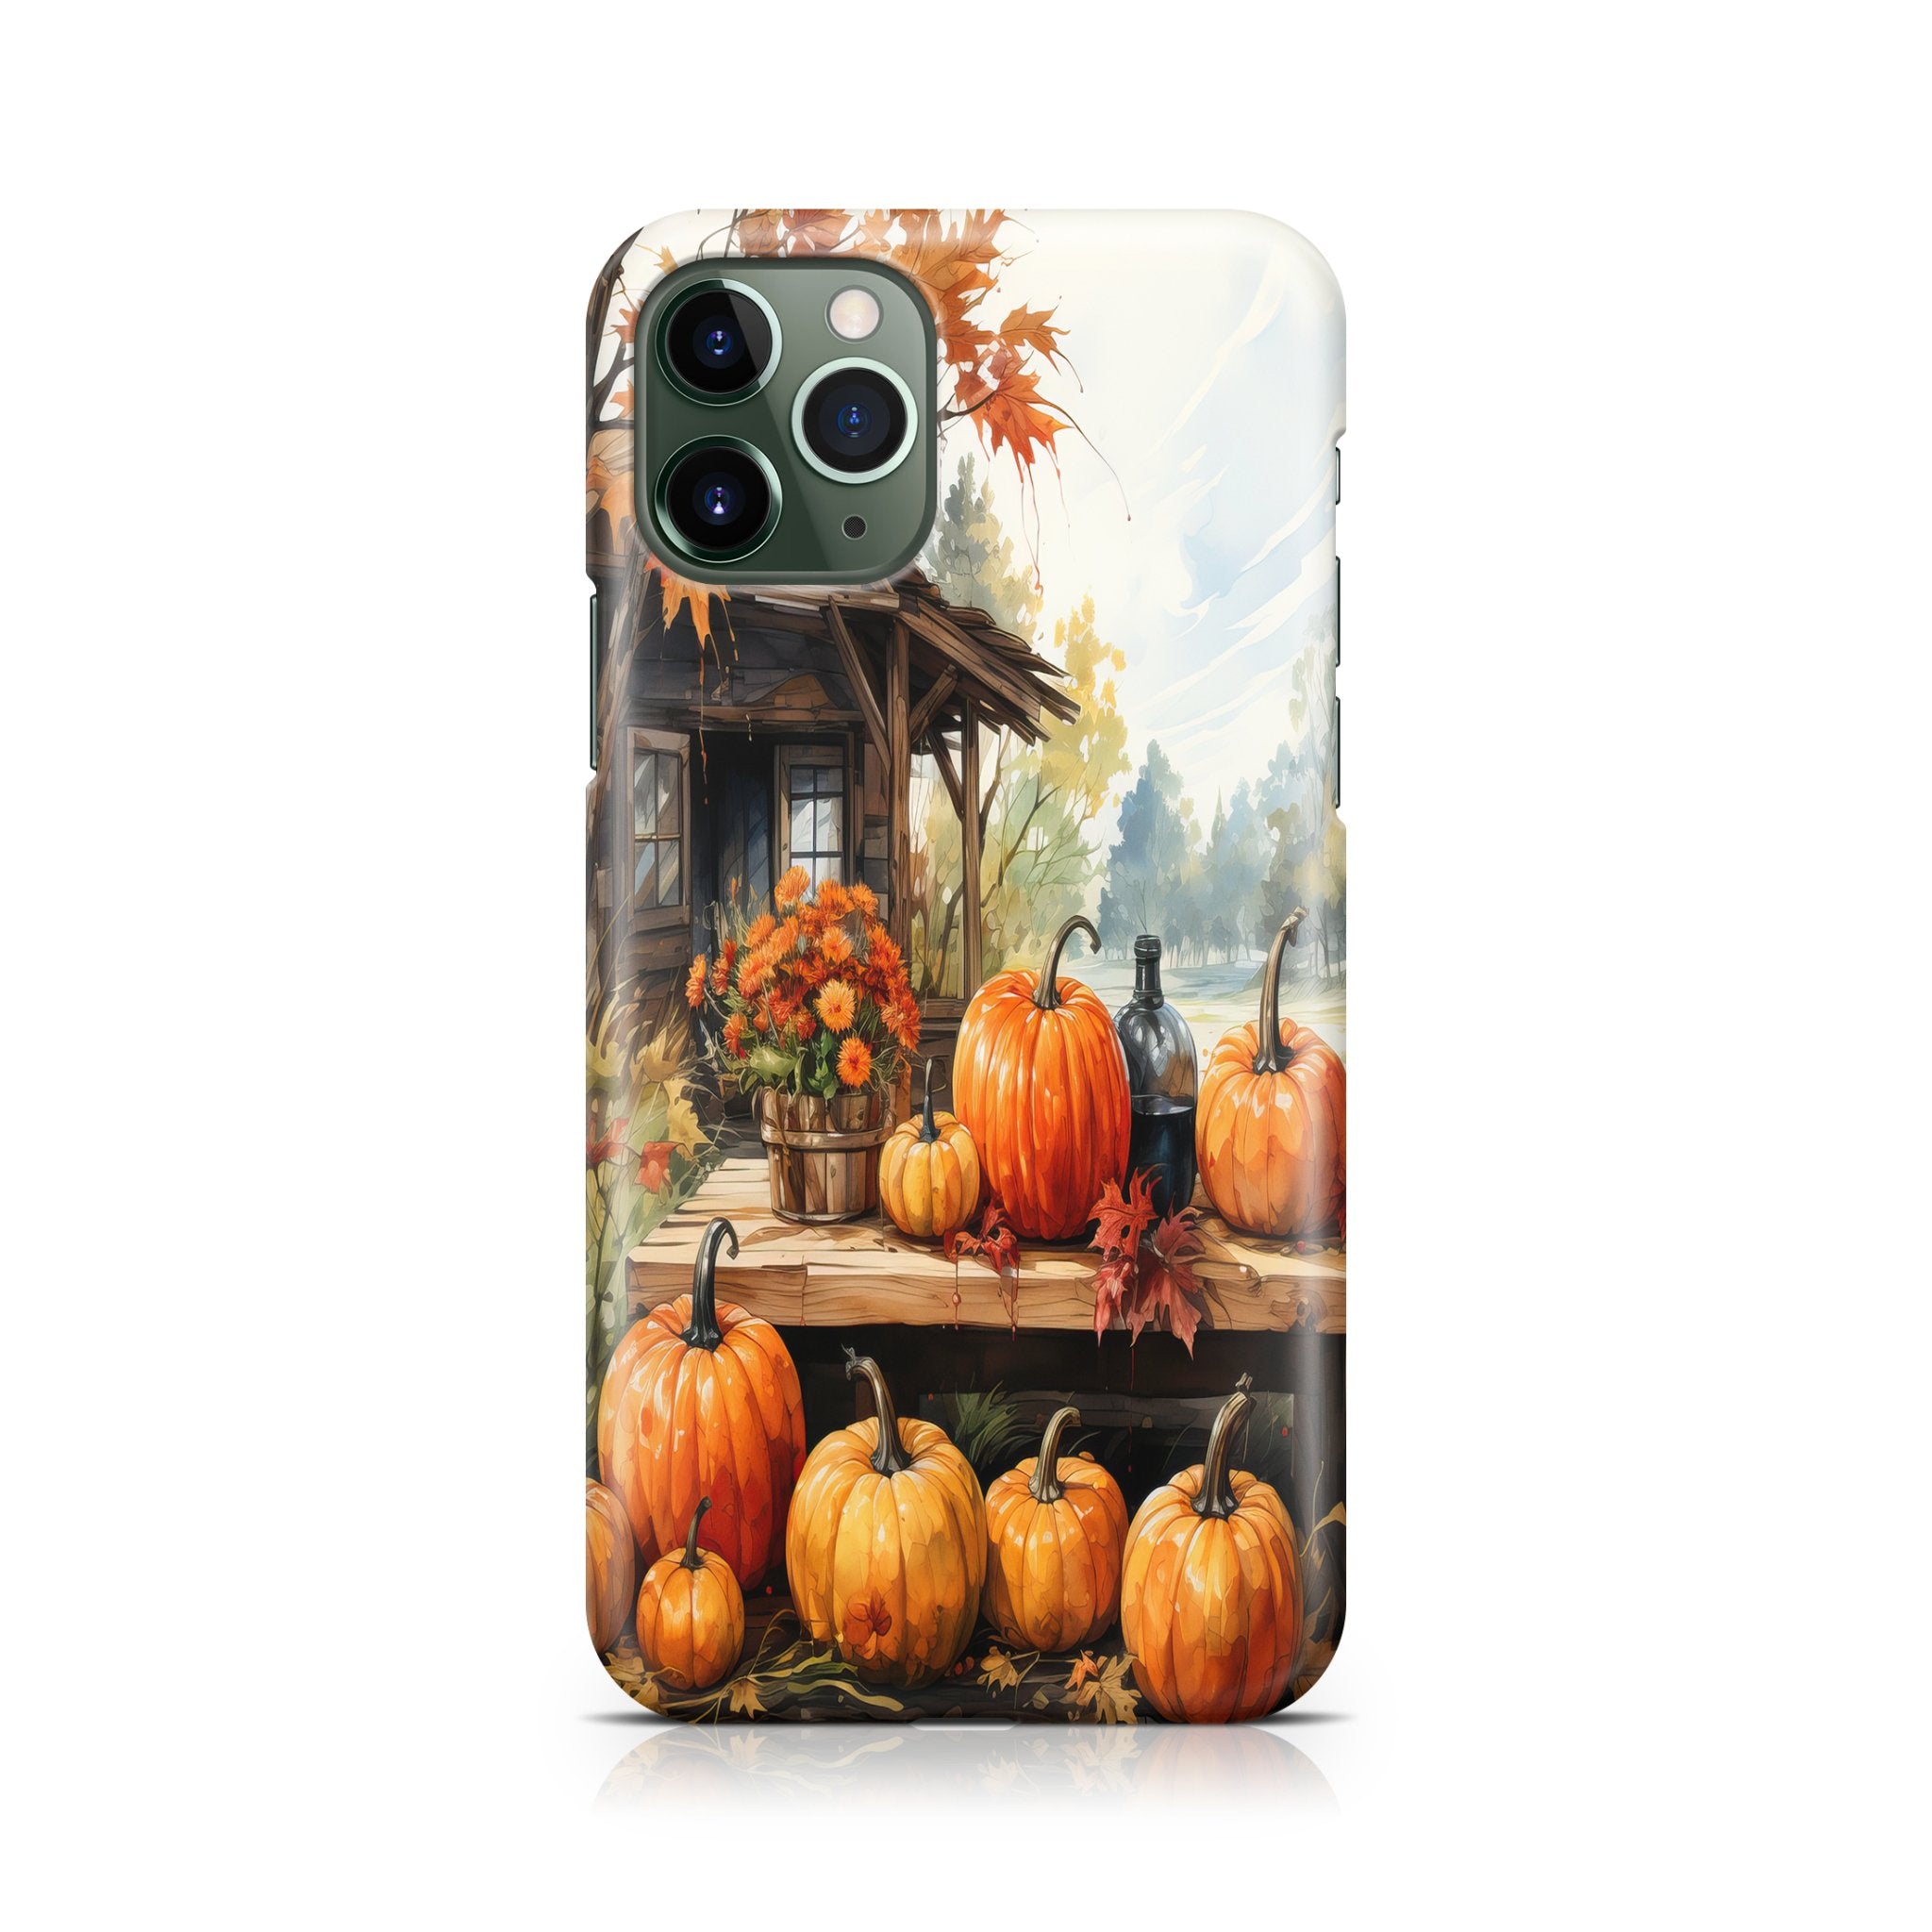 Fall Farm Harvest - iPhone phone case designs by CaseSwagger